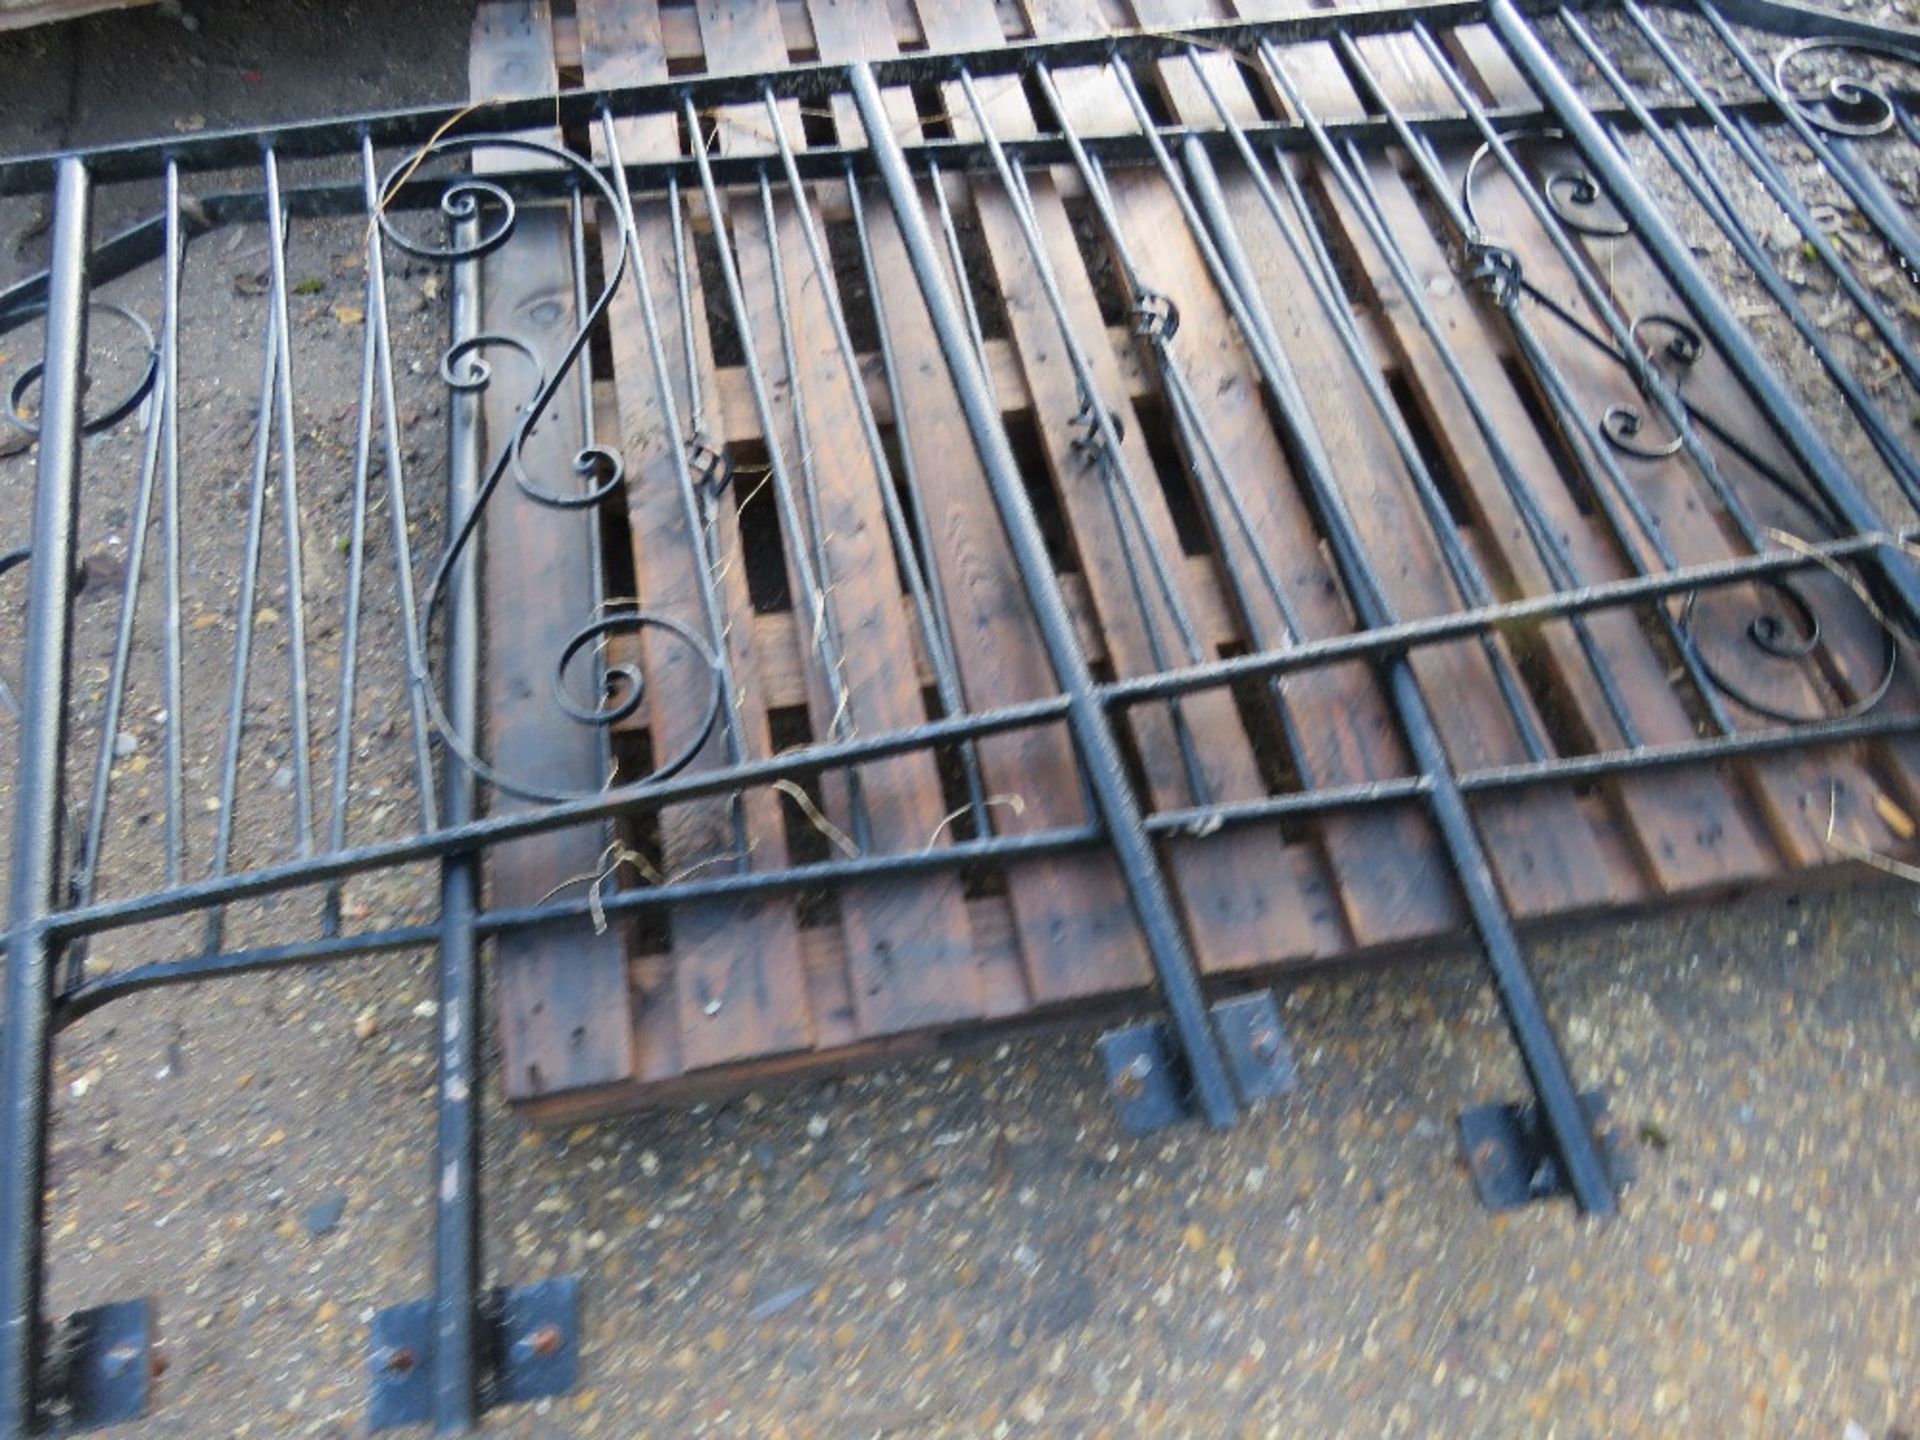 2 X DECORATIVE METAL BALLISTRADE STAIR RAILS, CIRCA 9FT LENGTH EACH This items is being item sold